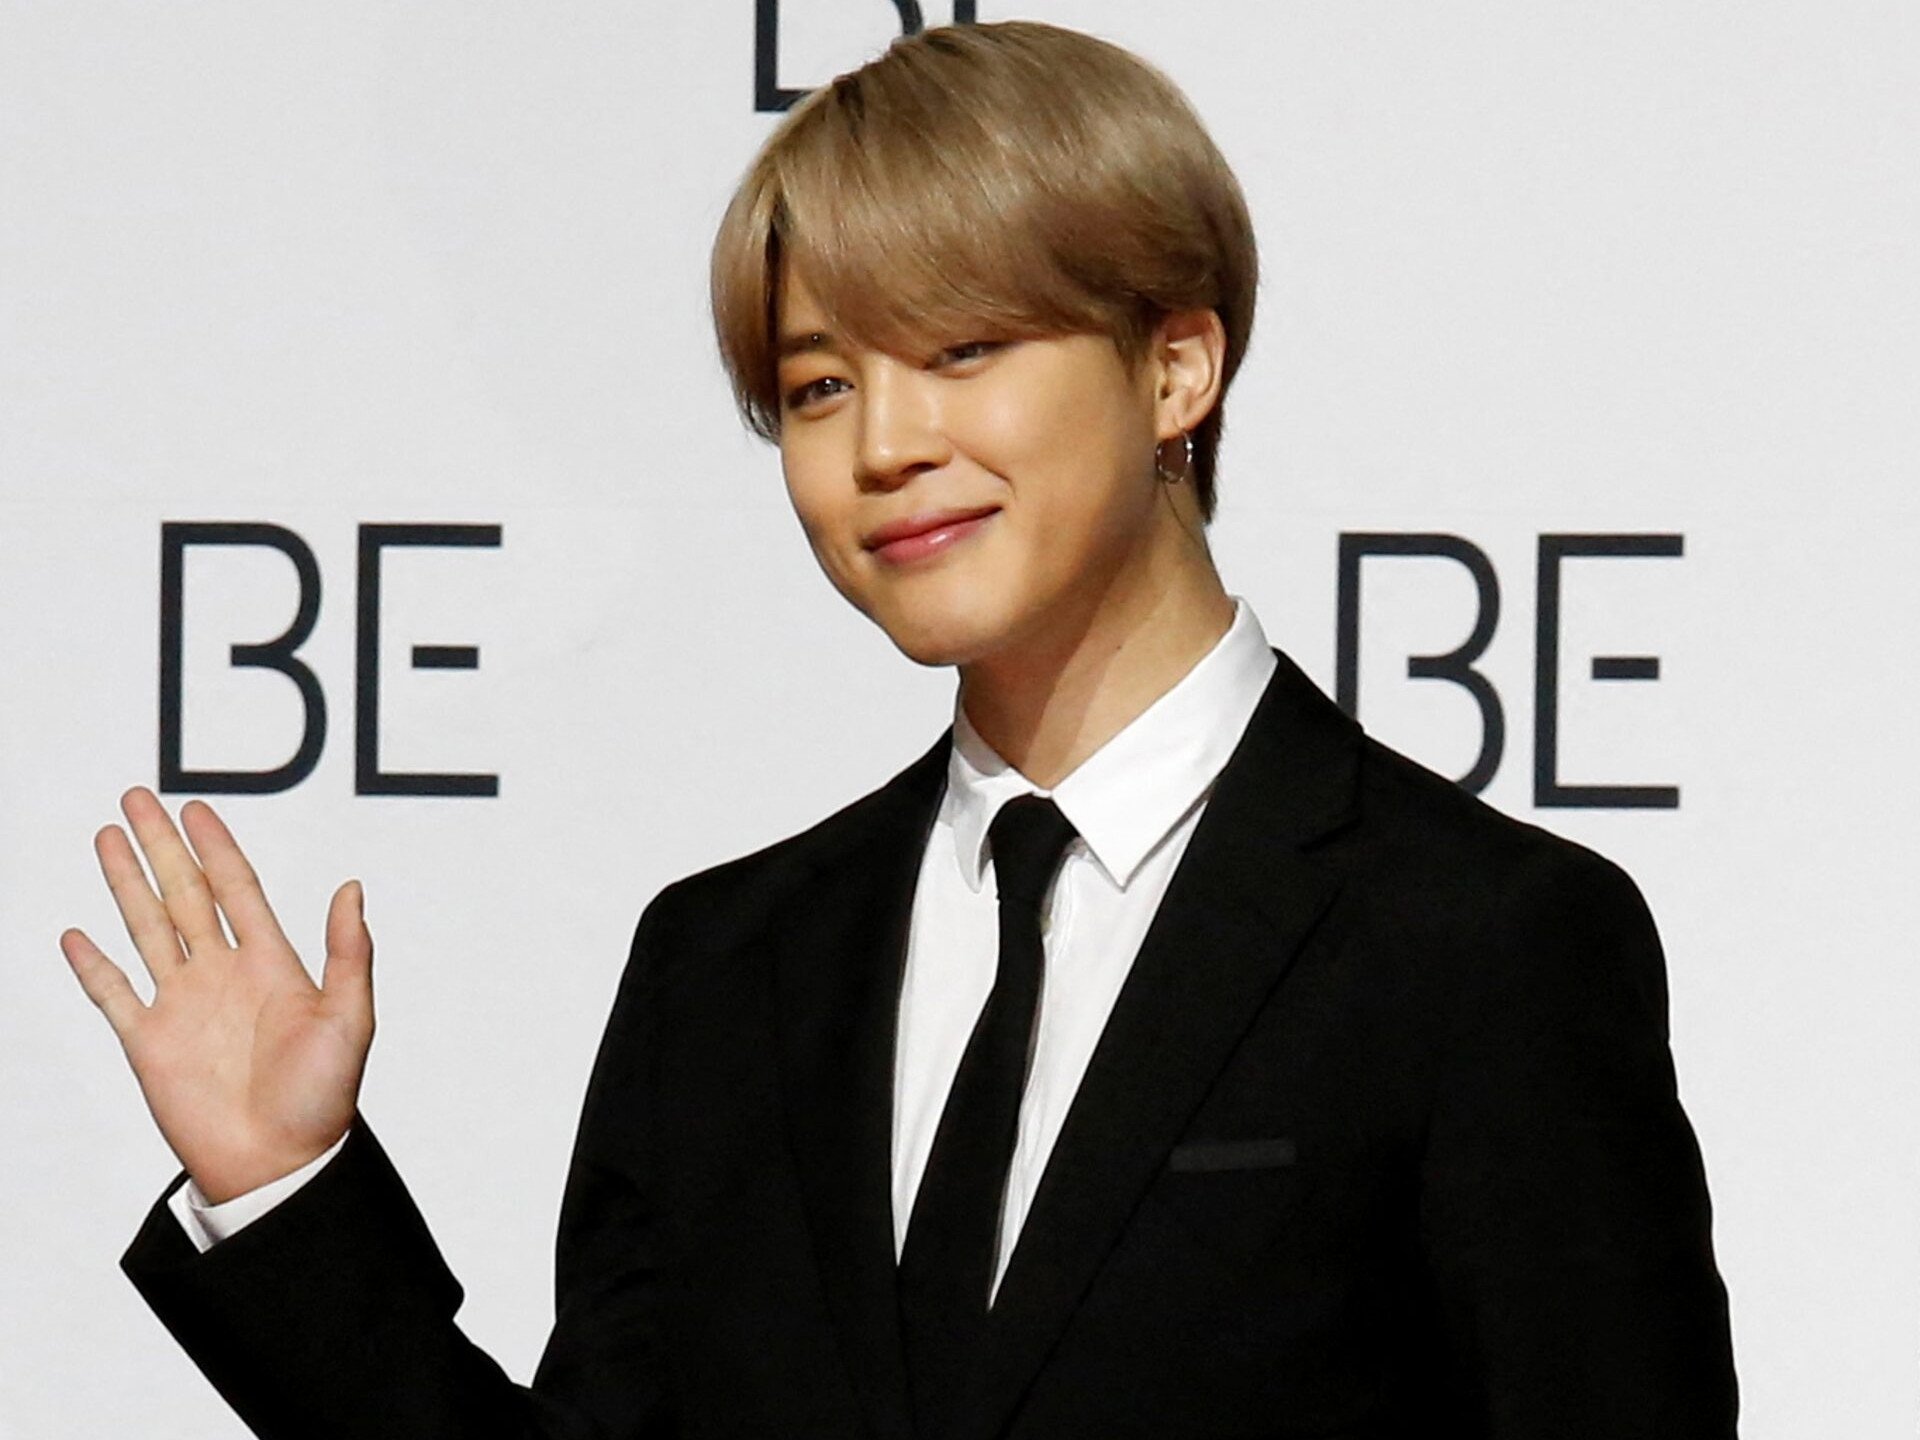 BTS’ Jimin debuts WHO live on The Tonight Show and shares studio videos with Jimmy Fallon